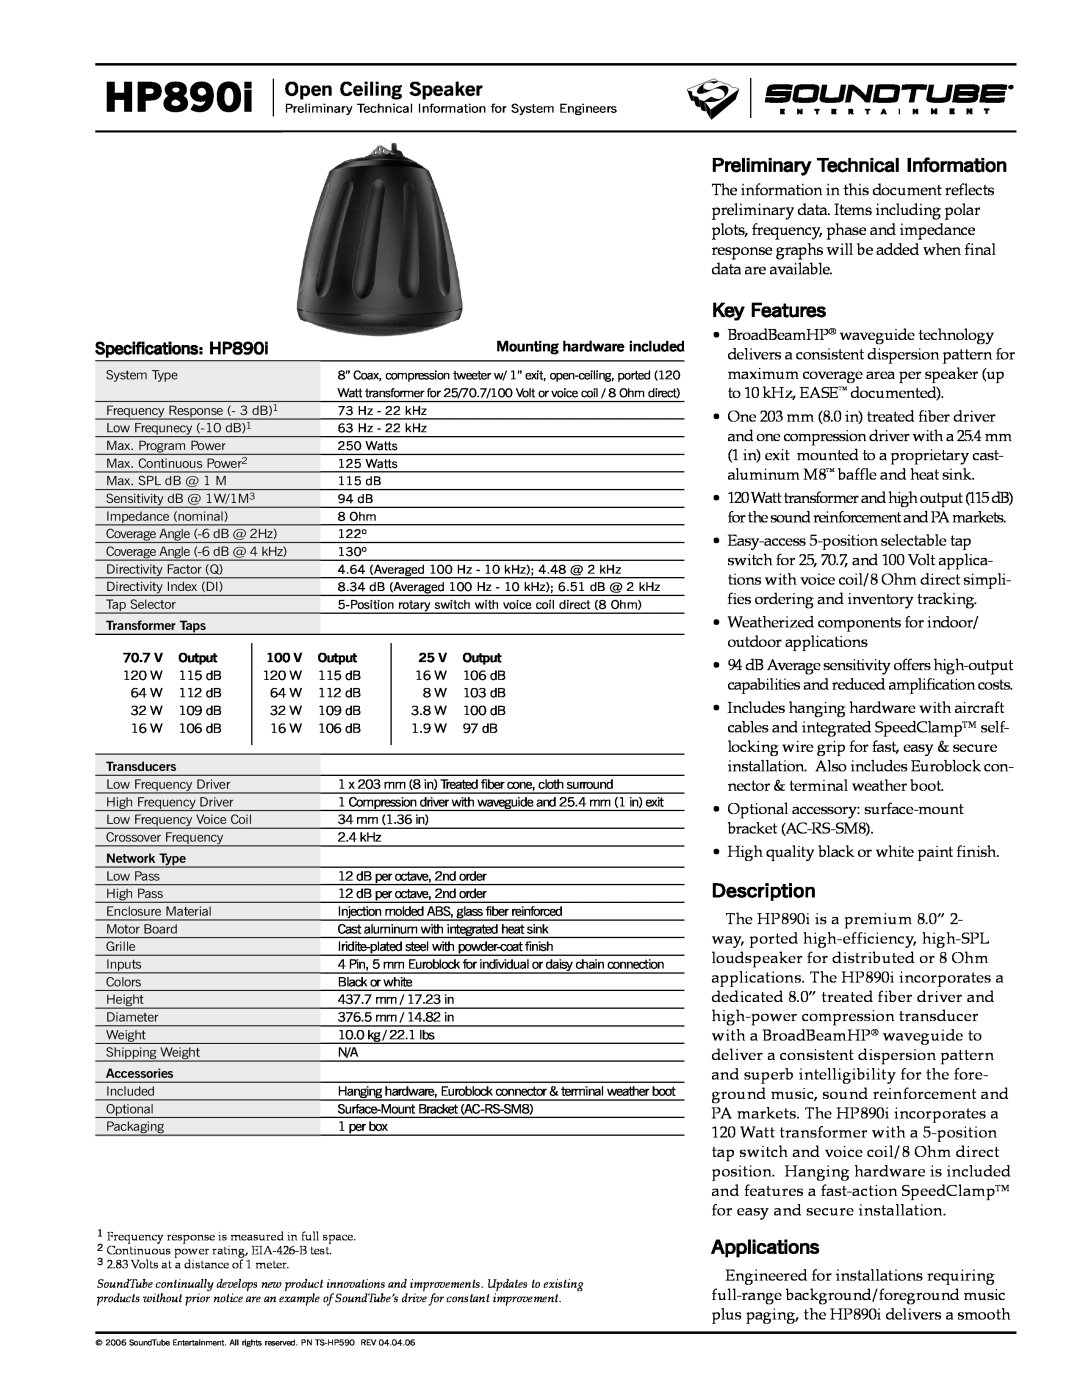 Phase Technology HP890i specifications Open Ceiling Speaker, Preliminary TechnicalInformation, Key Features, Description 